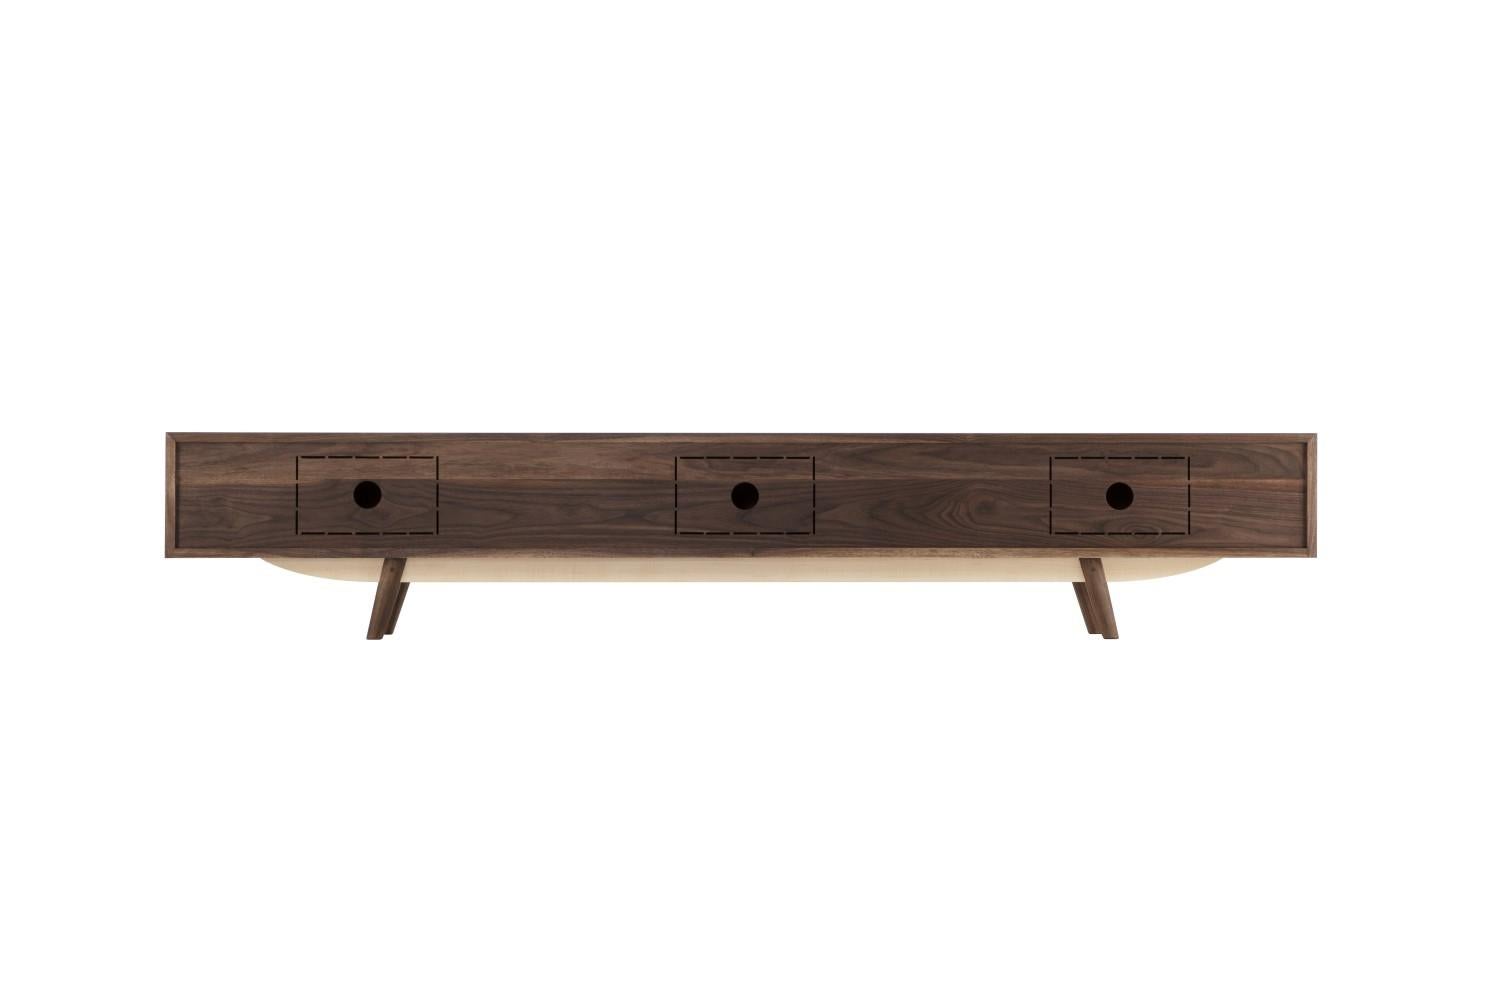 Asian Walnut Tv Console with Storage & Cable Management For Sale